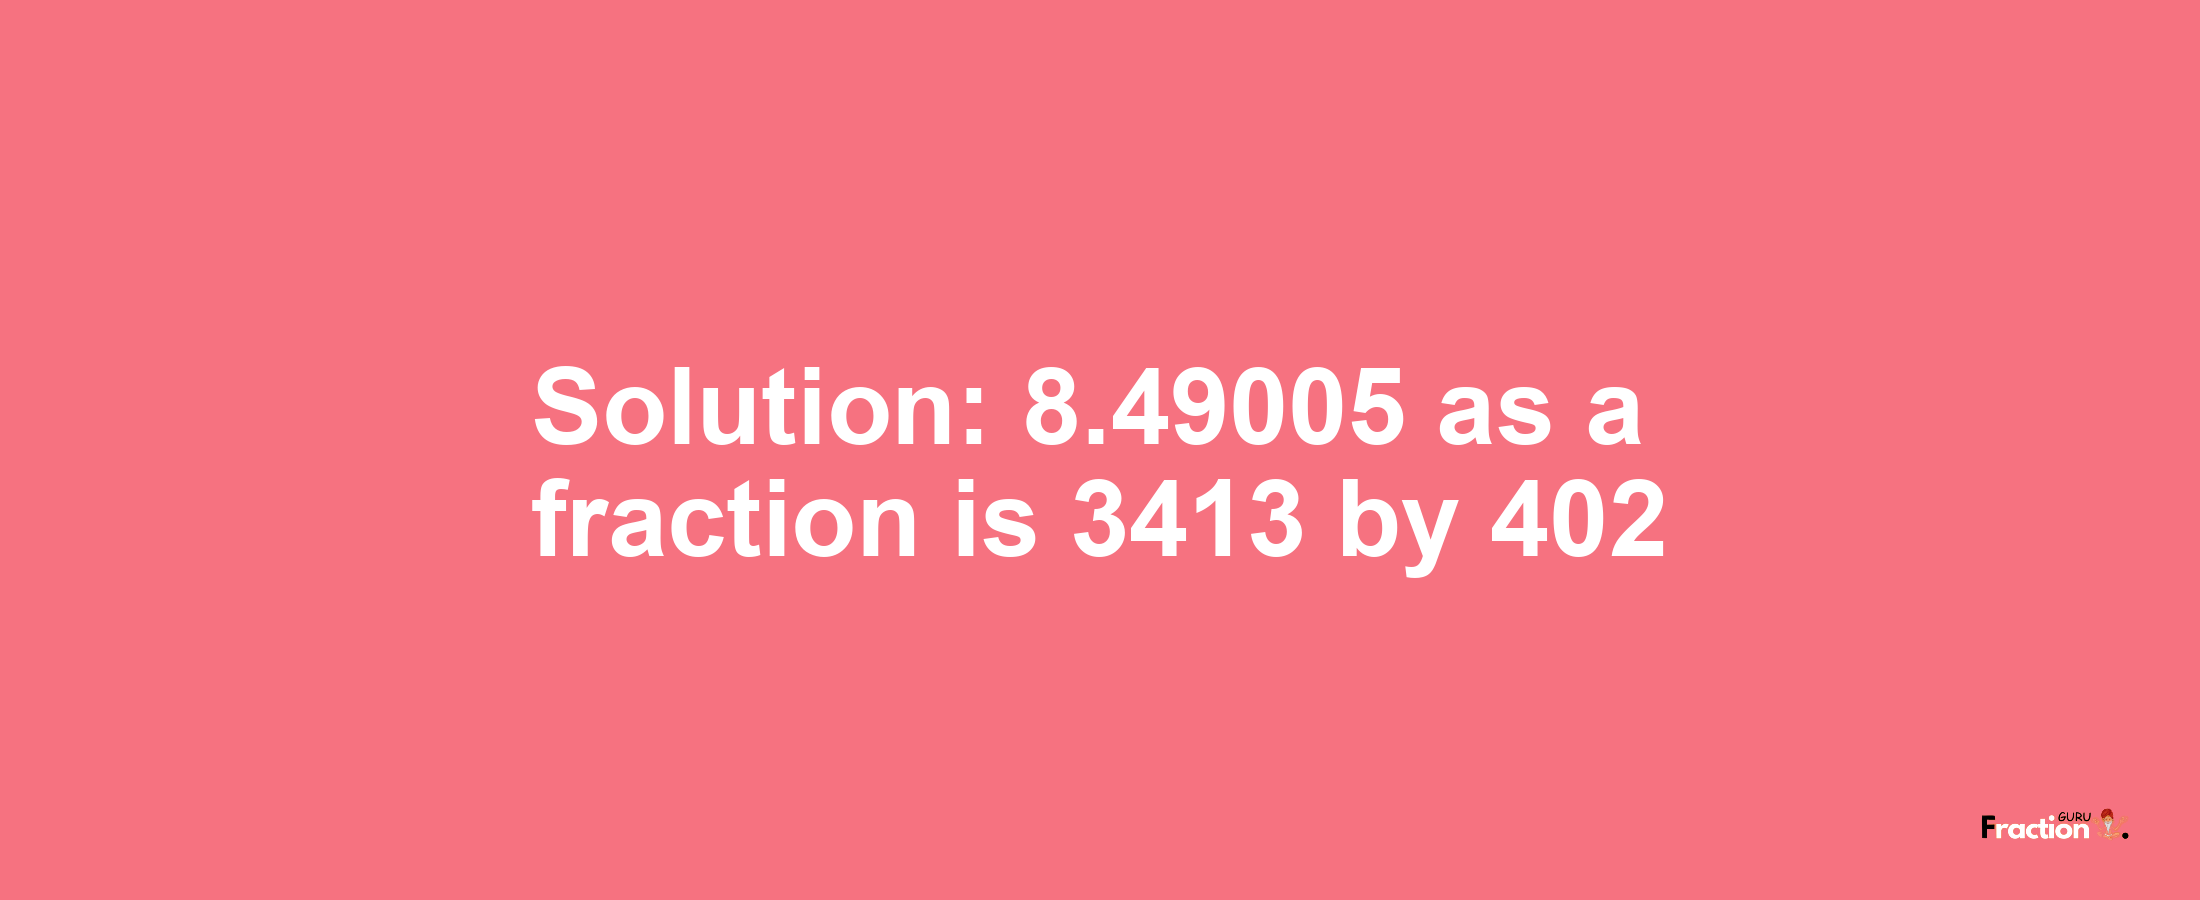 Solution:8.49005 as a fraction is 3413/402